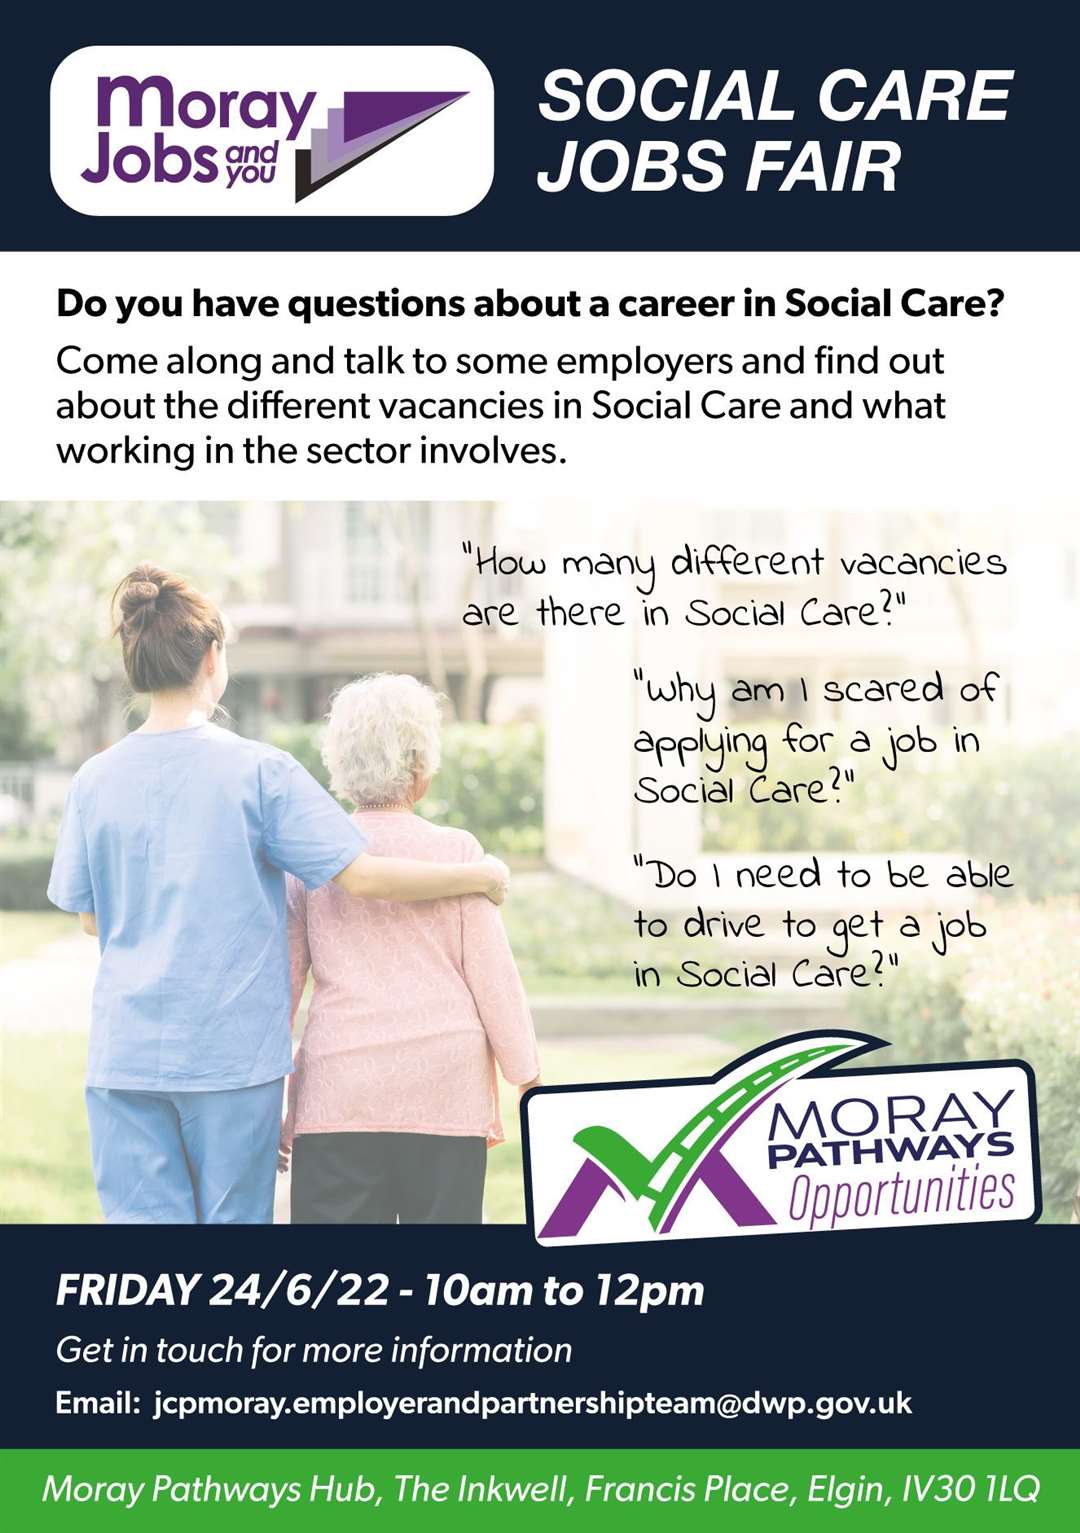 A variety of social care roles will be available at the forthcoming jobs fair.